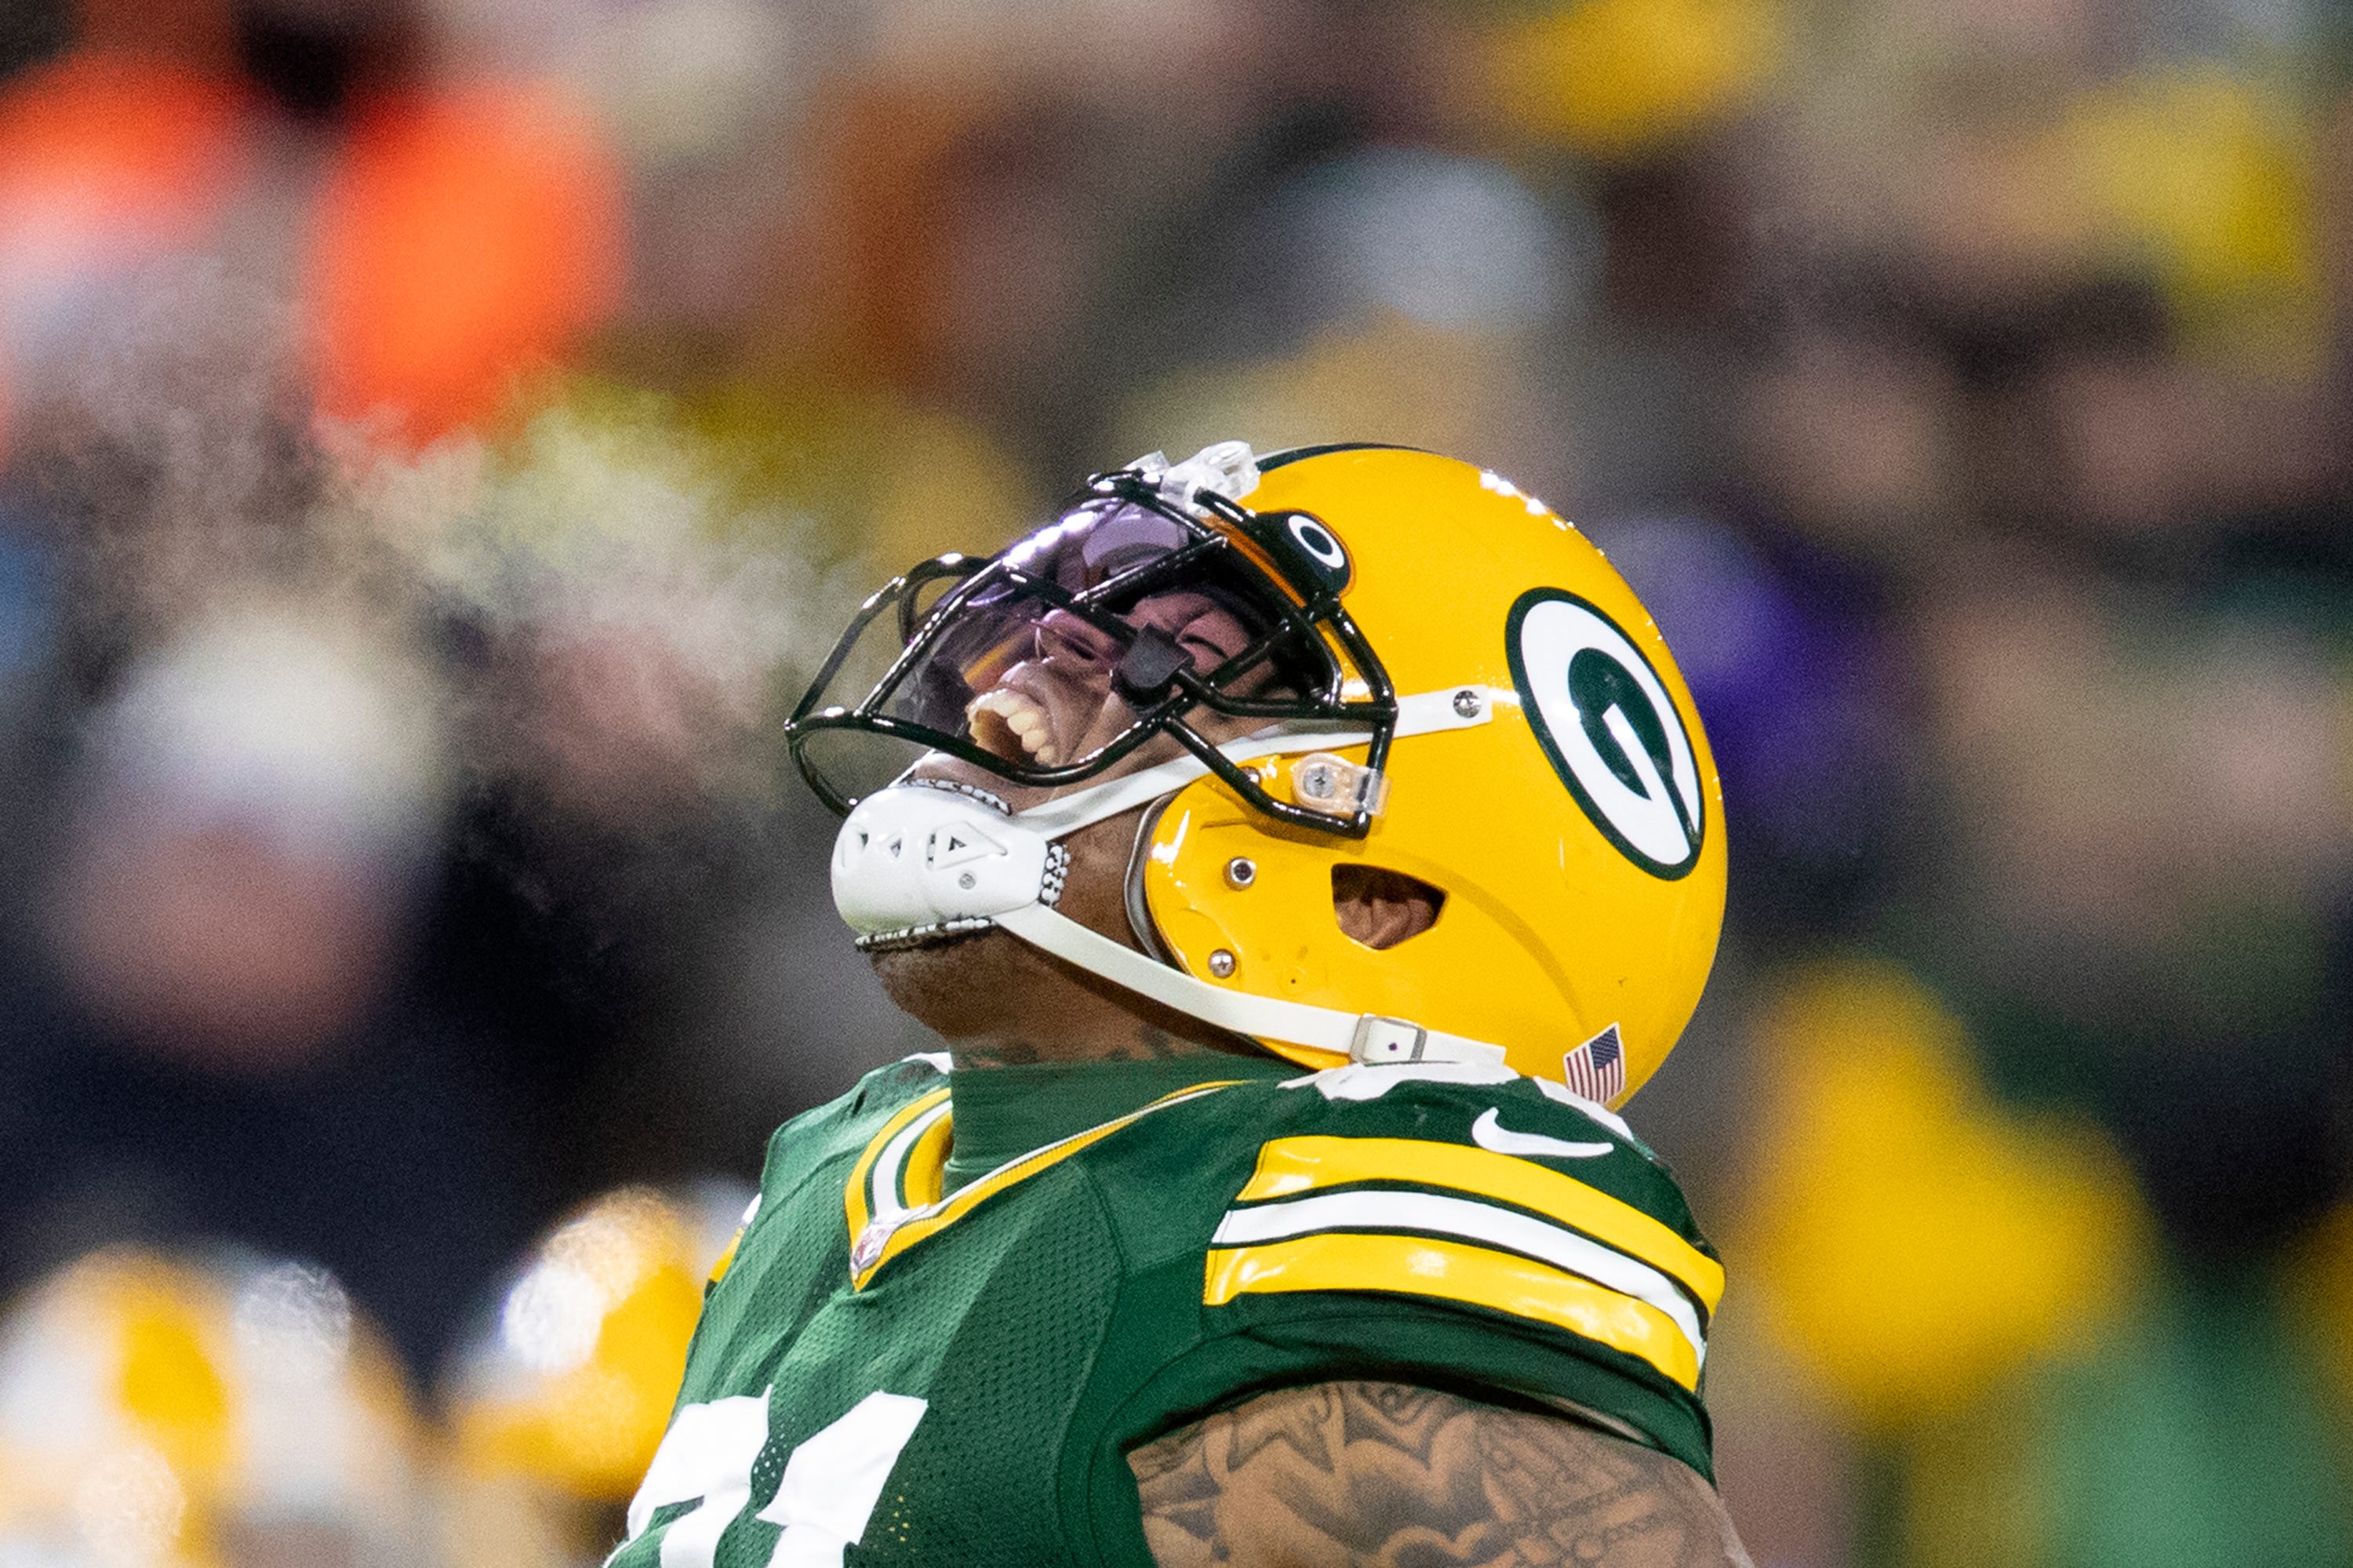 Green Bay Packers outside linebacker Preston Smith (91) celebrates in the second quarter against the Minnesota Vikings, Sunday, January 2, 2022, at Lambeau Field in Green Bay, Wis. Samantha Madar/USA TODAY NETWORK-Wisconsin